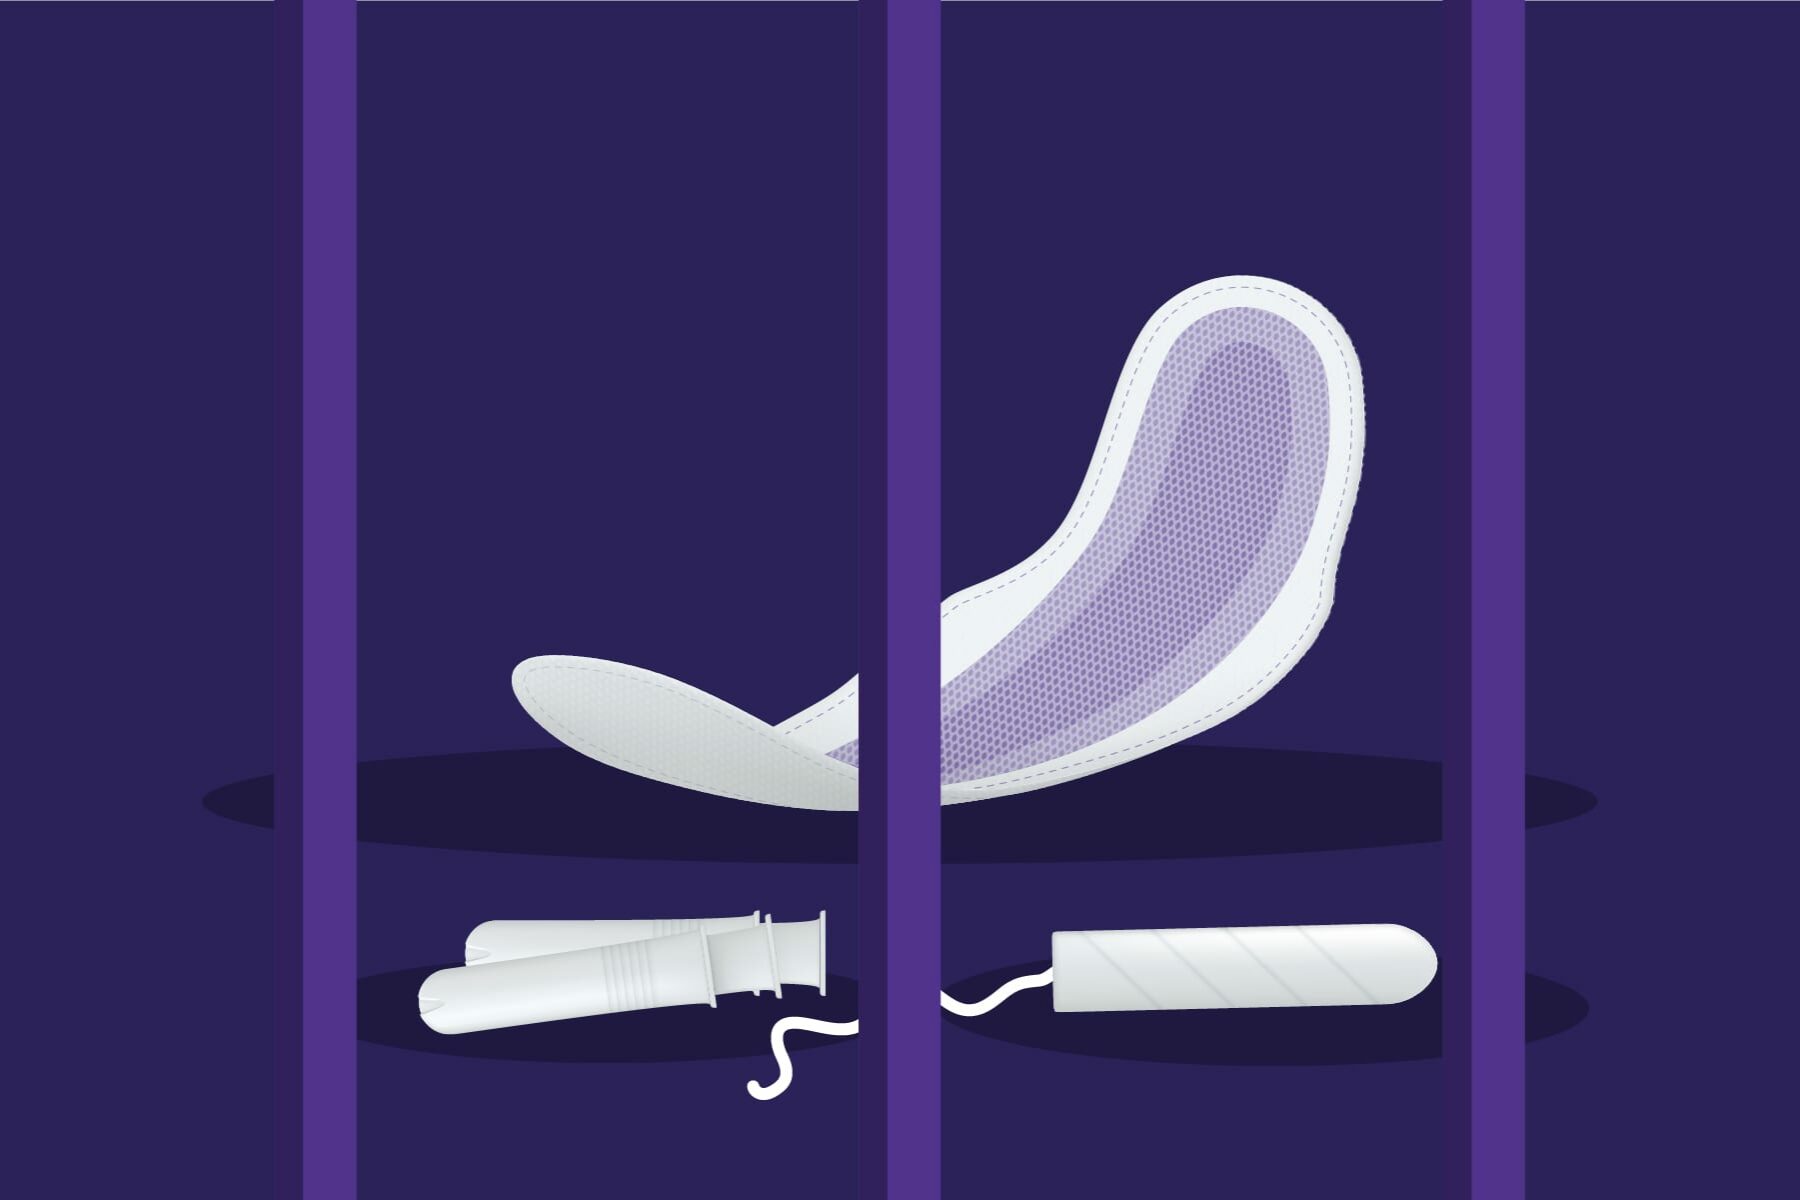 Illustration of inaccessible period products.